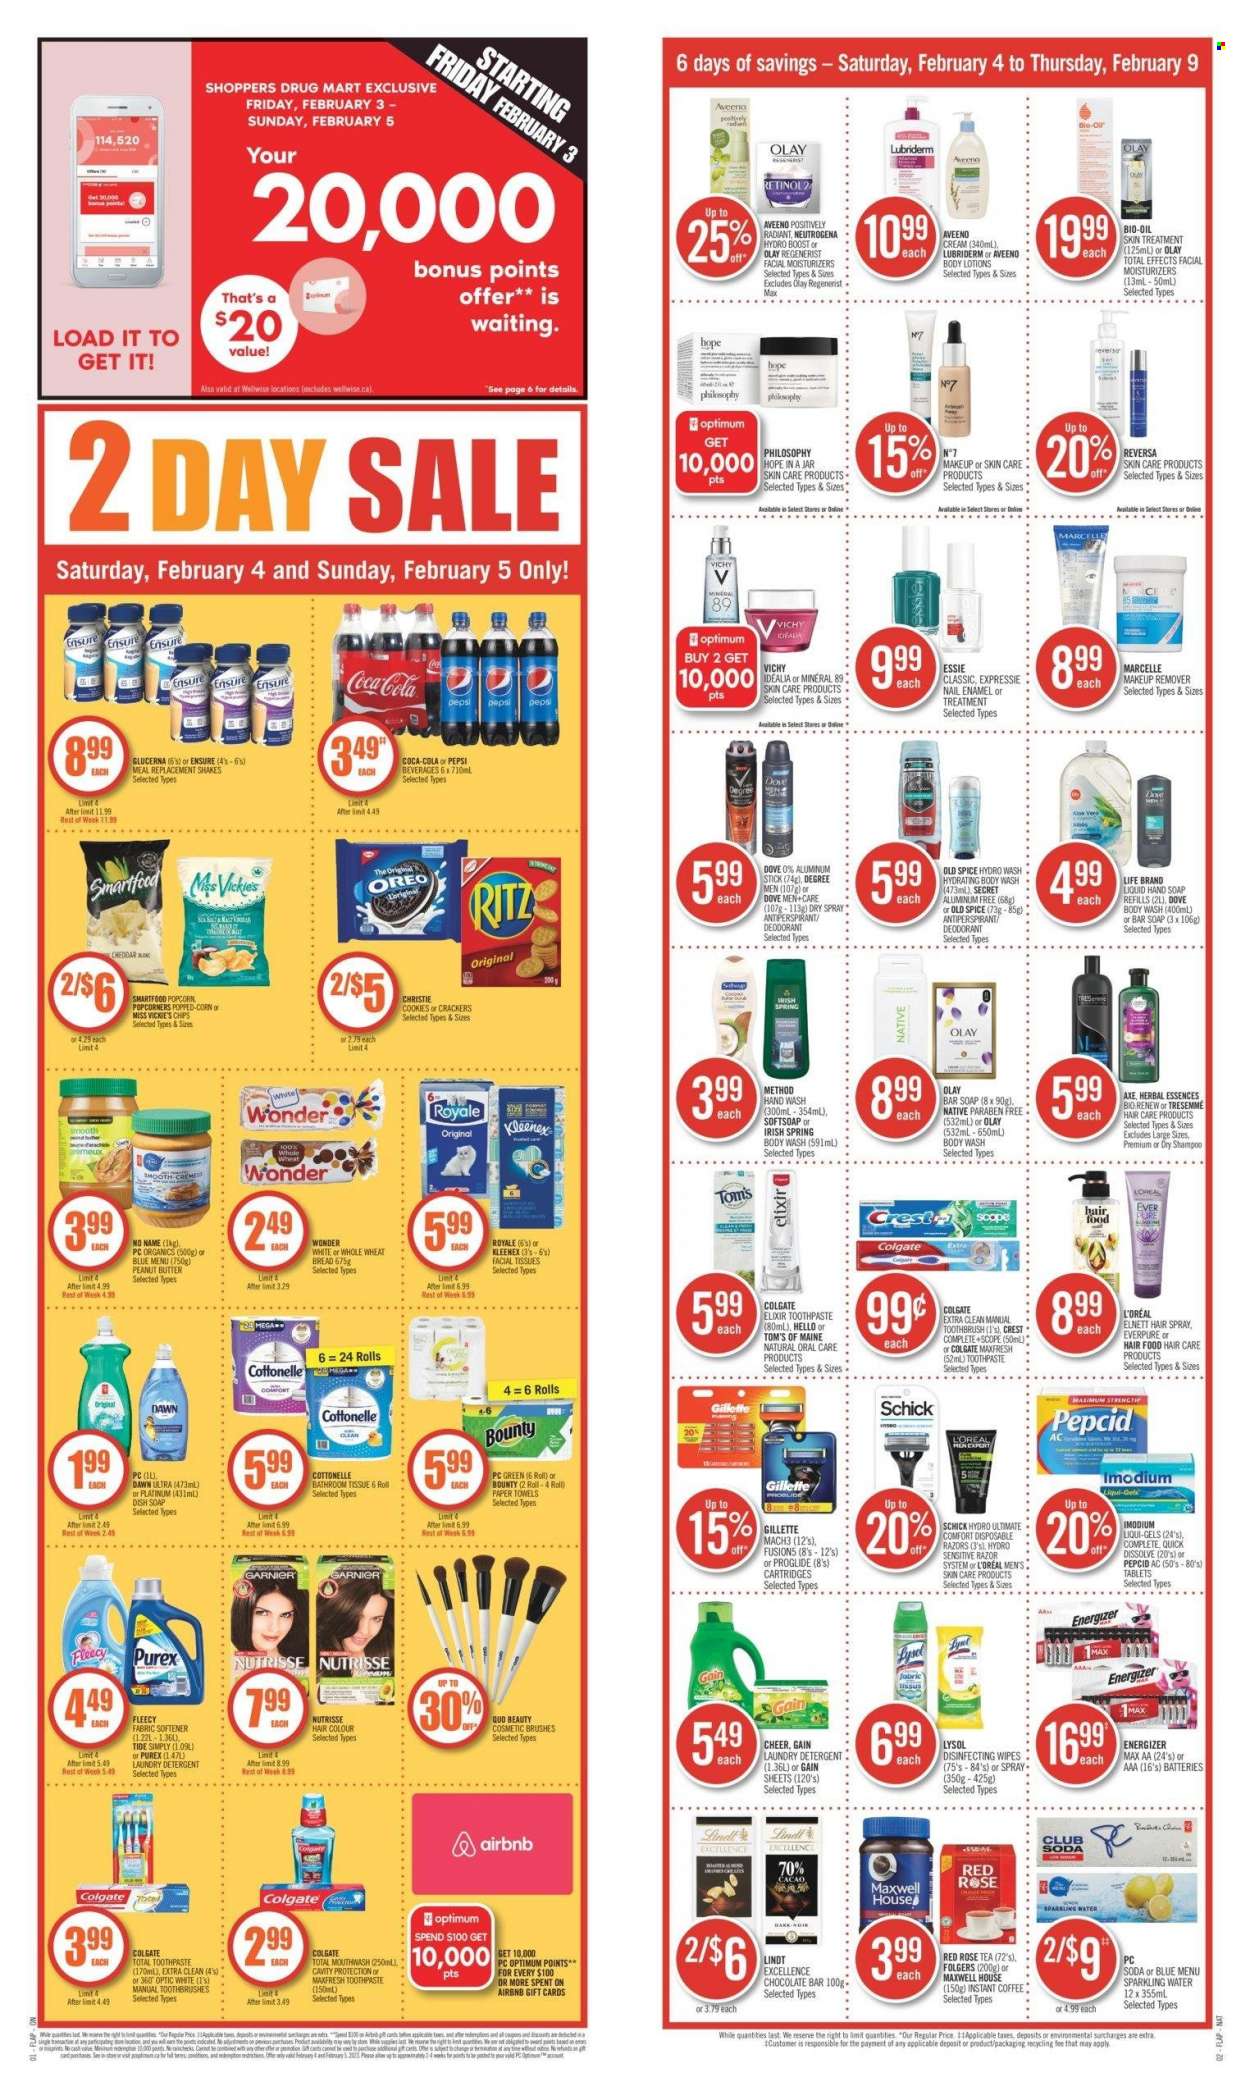 thumbnail - Shoppers Drug Mart Flyer - February 04, 2023 - February 09, 2023 - Sales products - wheat bread, No Name, shake, cookies, Dove, Bounty, crackers, RITZ, chocolate bar, chips, Smartfood, popcorn, corn, spice, peanut butter, Coca-Cola, Pepsi, soda, sparkling water, Boost, Maxwell House, tea, coffee, instant coffee, Folgers, wipes, Aveeno, bath tissue, Cottonelle, Kleenex, kitchen towels, paper towels, Gain, Lysol, Tide, fabric softener, laundry detergent, Purex, body wash, Softsoap, Vichy, hand soap, hand wash, soap bar, soap, toothbrush, toothpaste, mouthwash, Crest, facial tissues, Gillette, L’Oréal, moisturizer, Olay, TRESemmé, hair color, Herbal Essences, Lubriderm, anti-perspirant, Axe, razor, Schick, disposable razor, nail enamel, makeup remover, wok, jar, battery, Optimum, Pepcid, Glucerna, detergent, Energizer, Colgate, Garnier, Neutrogena, shampoo, Imodium, Old Spice, Oreo, Lindt, deodorant. Page 20.